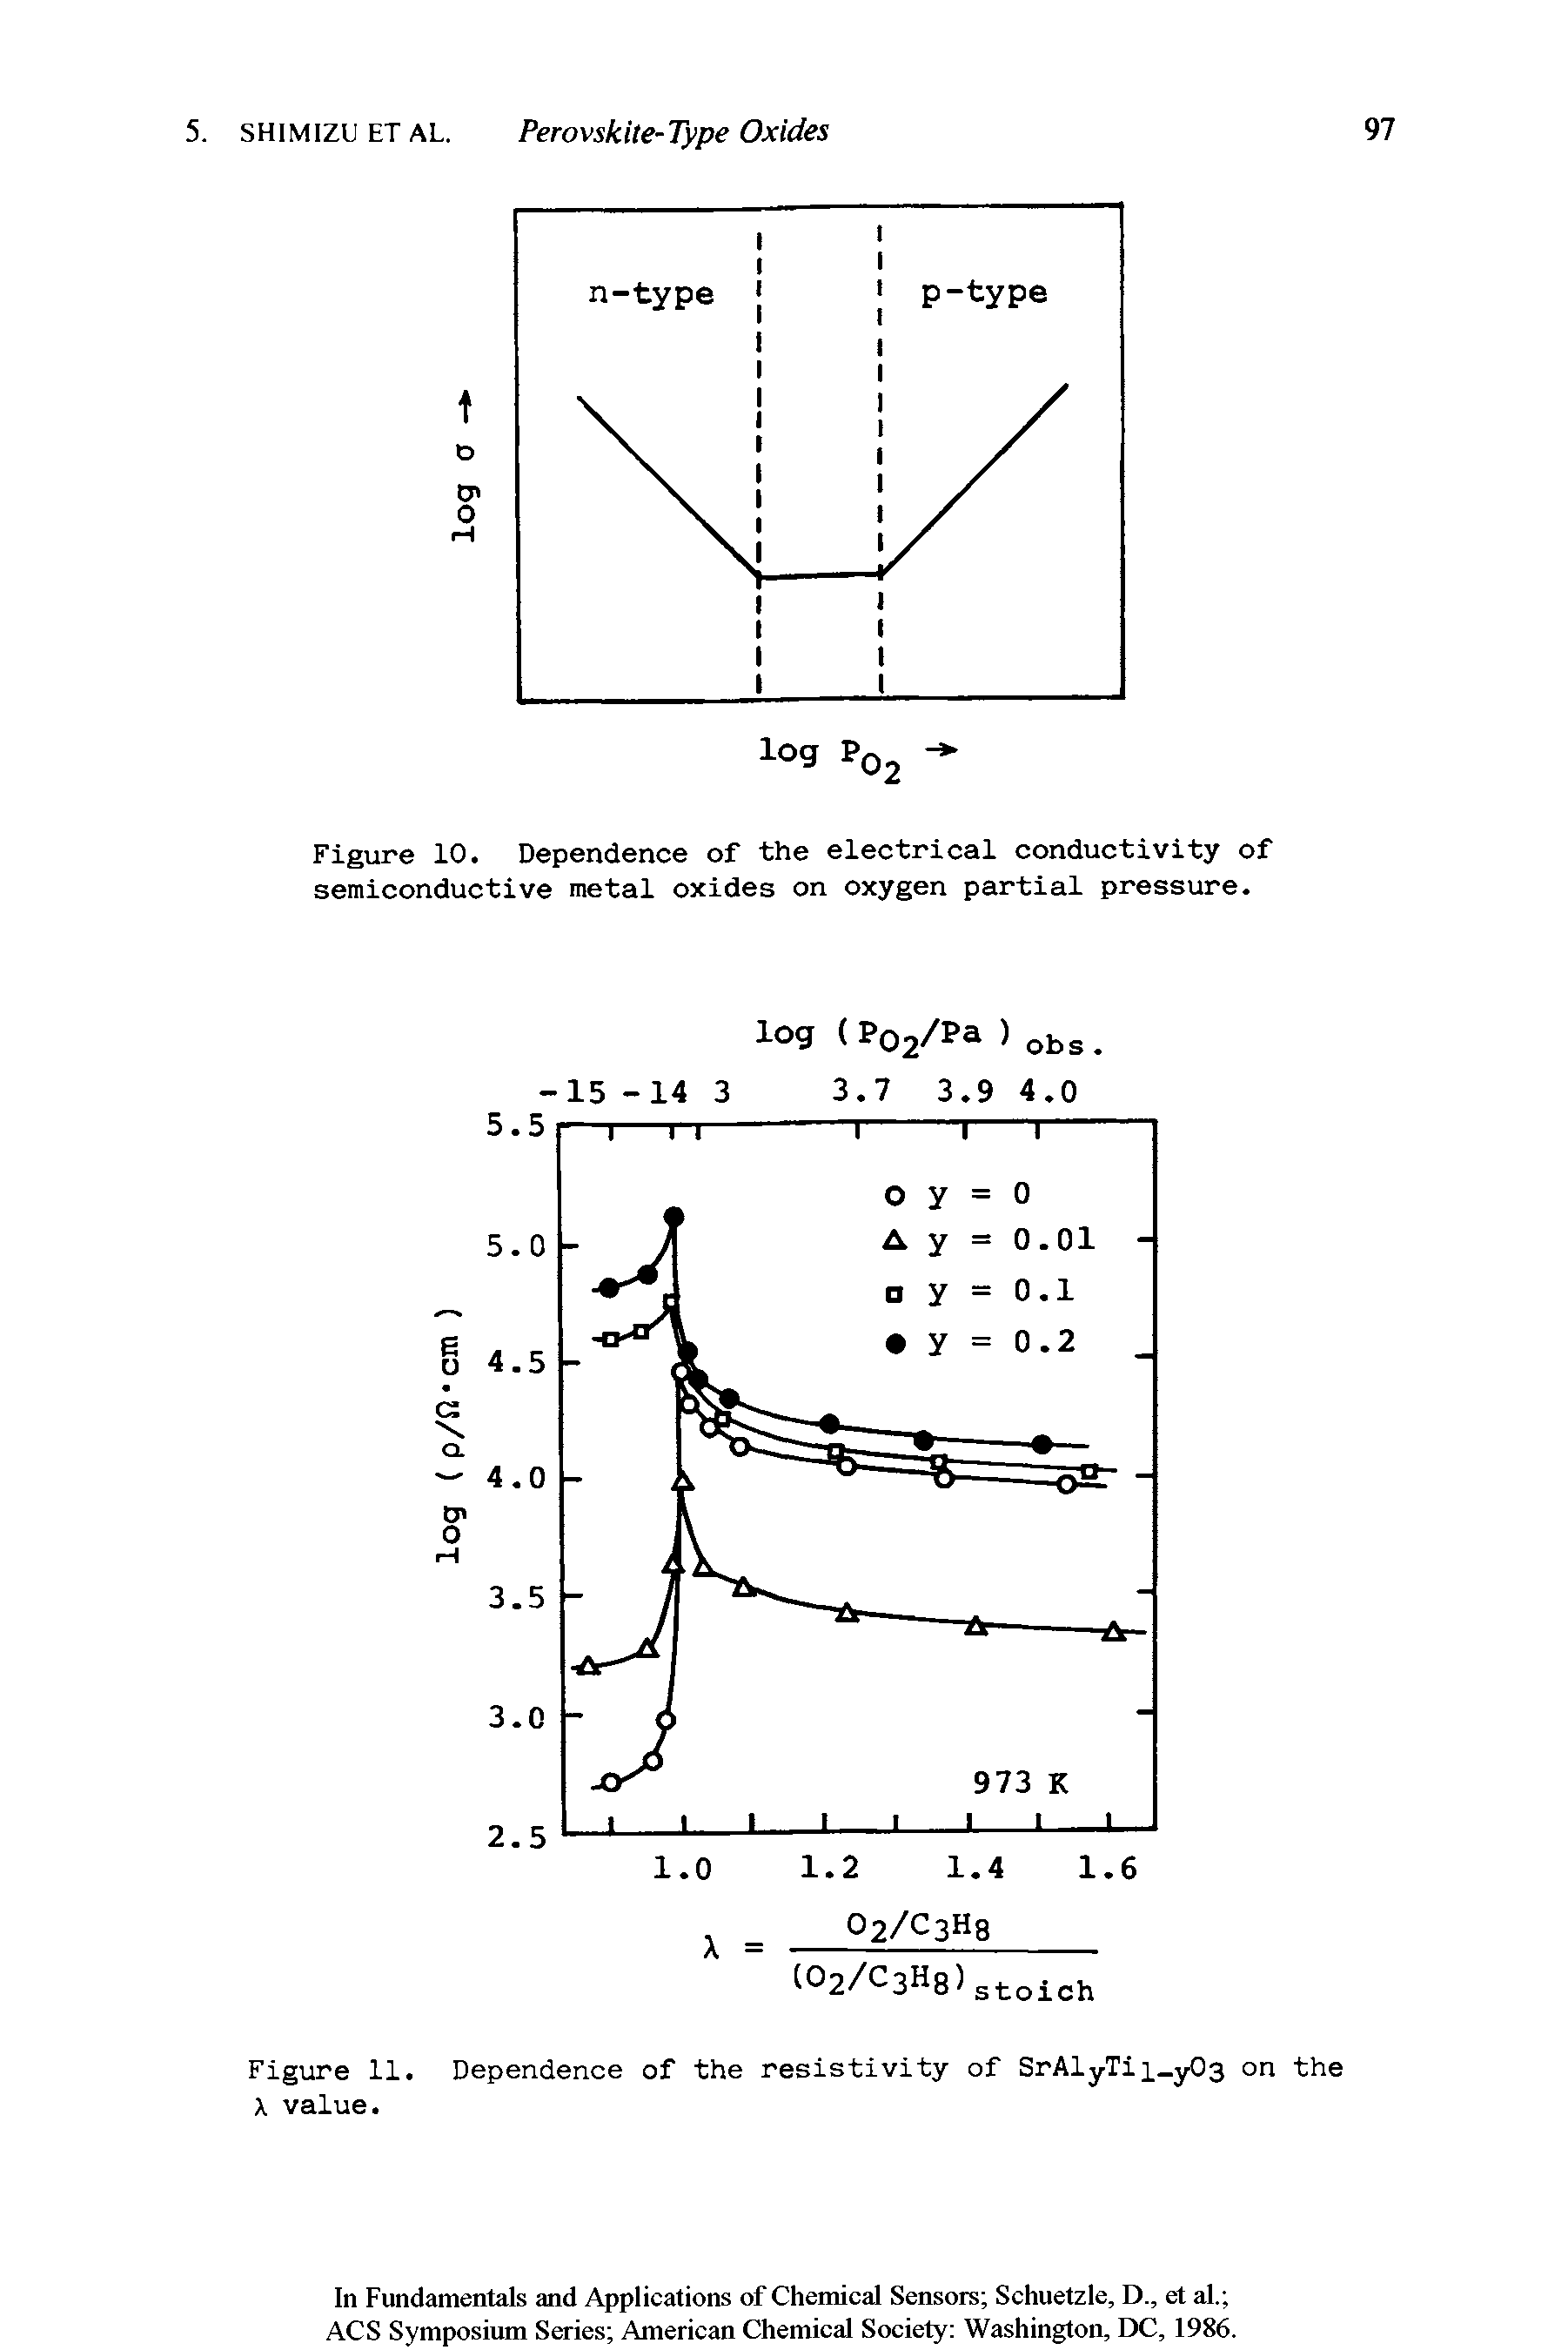 Figure 10. Dependence of the electrical conductivity of semiconductive metal oxides on oxygen partial pressure.